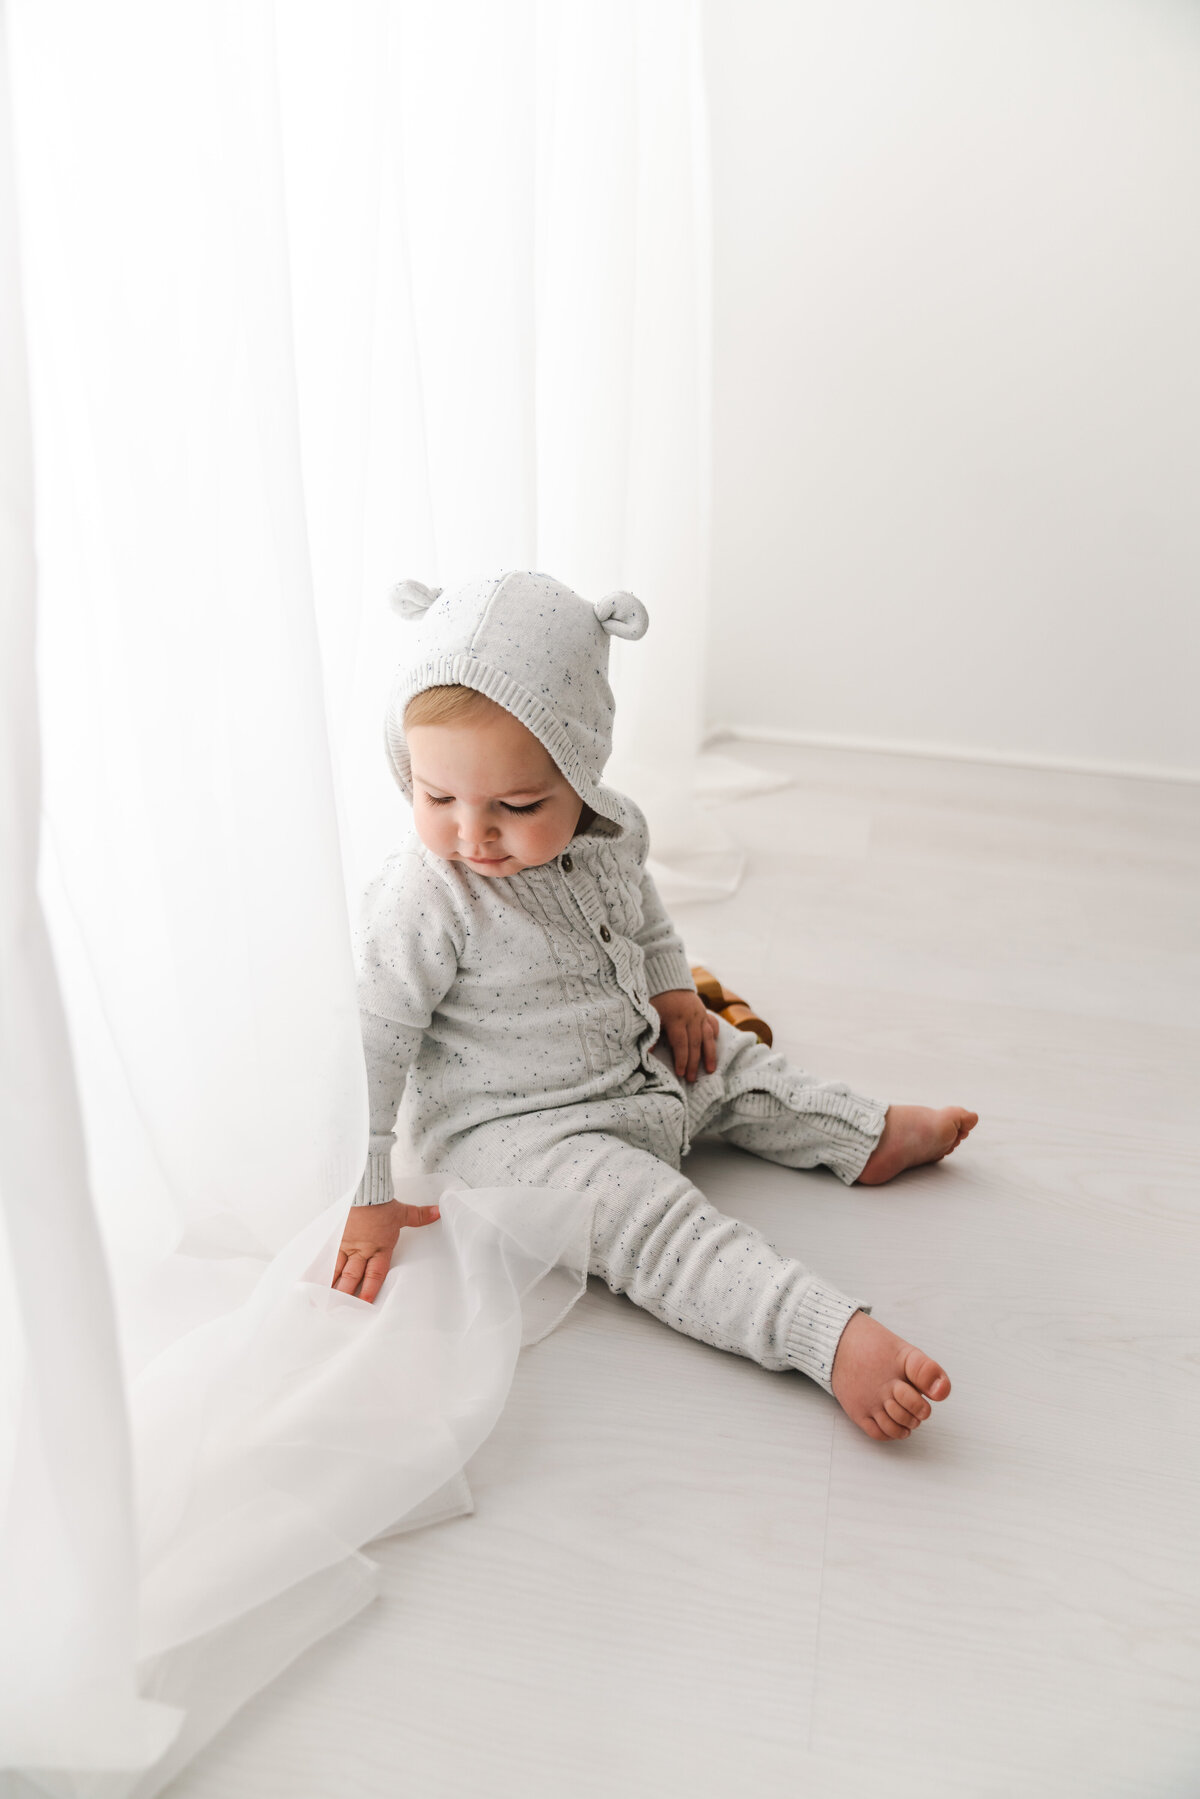 Toddler in cozy knitted outfit sitting on a white floor by a sheer curtain, with a contemplative expression. Taken by Fig and Olive Photography, Minneapolis Baby Photographer.